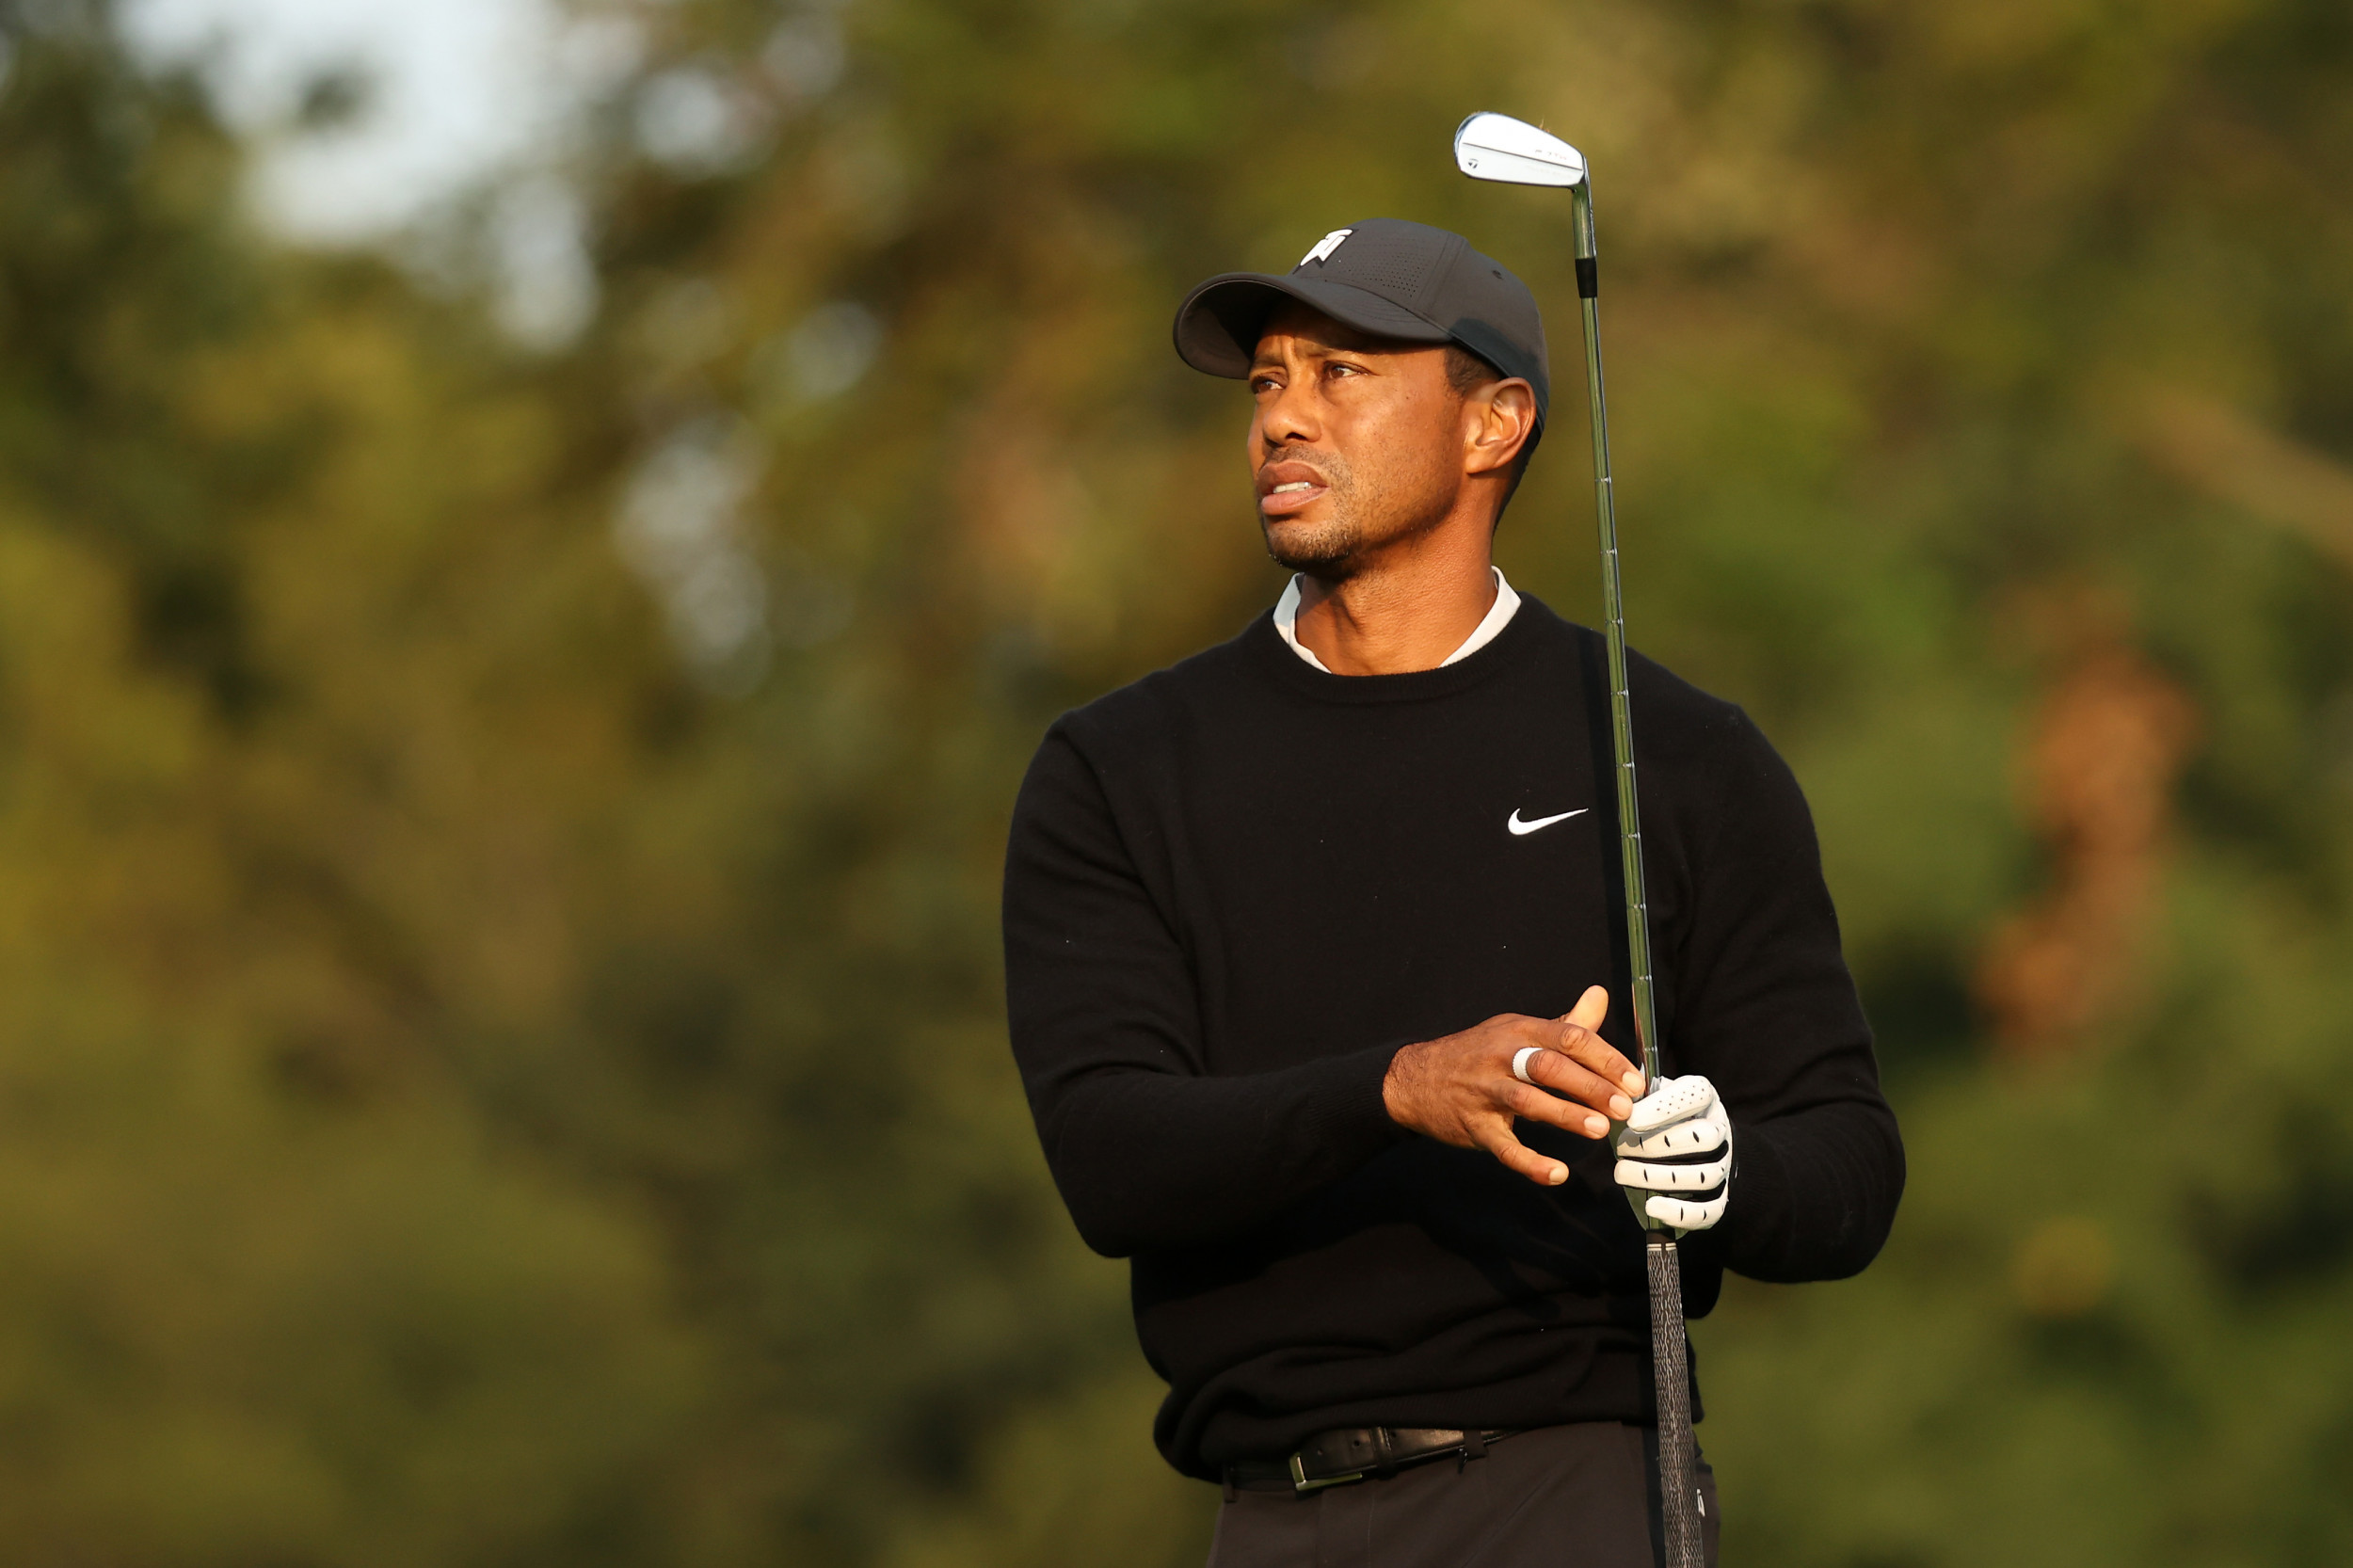 U.S. Open 2020: How to watch Tiger Woods' first round at Winged Foot.